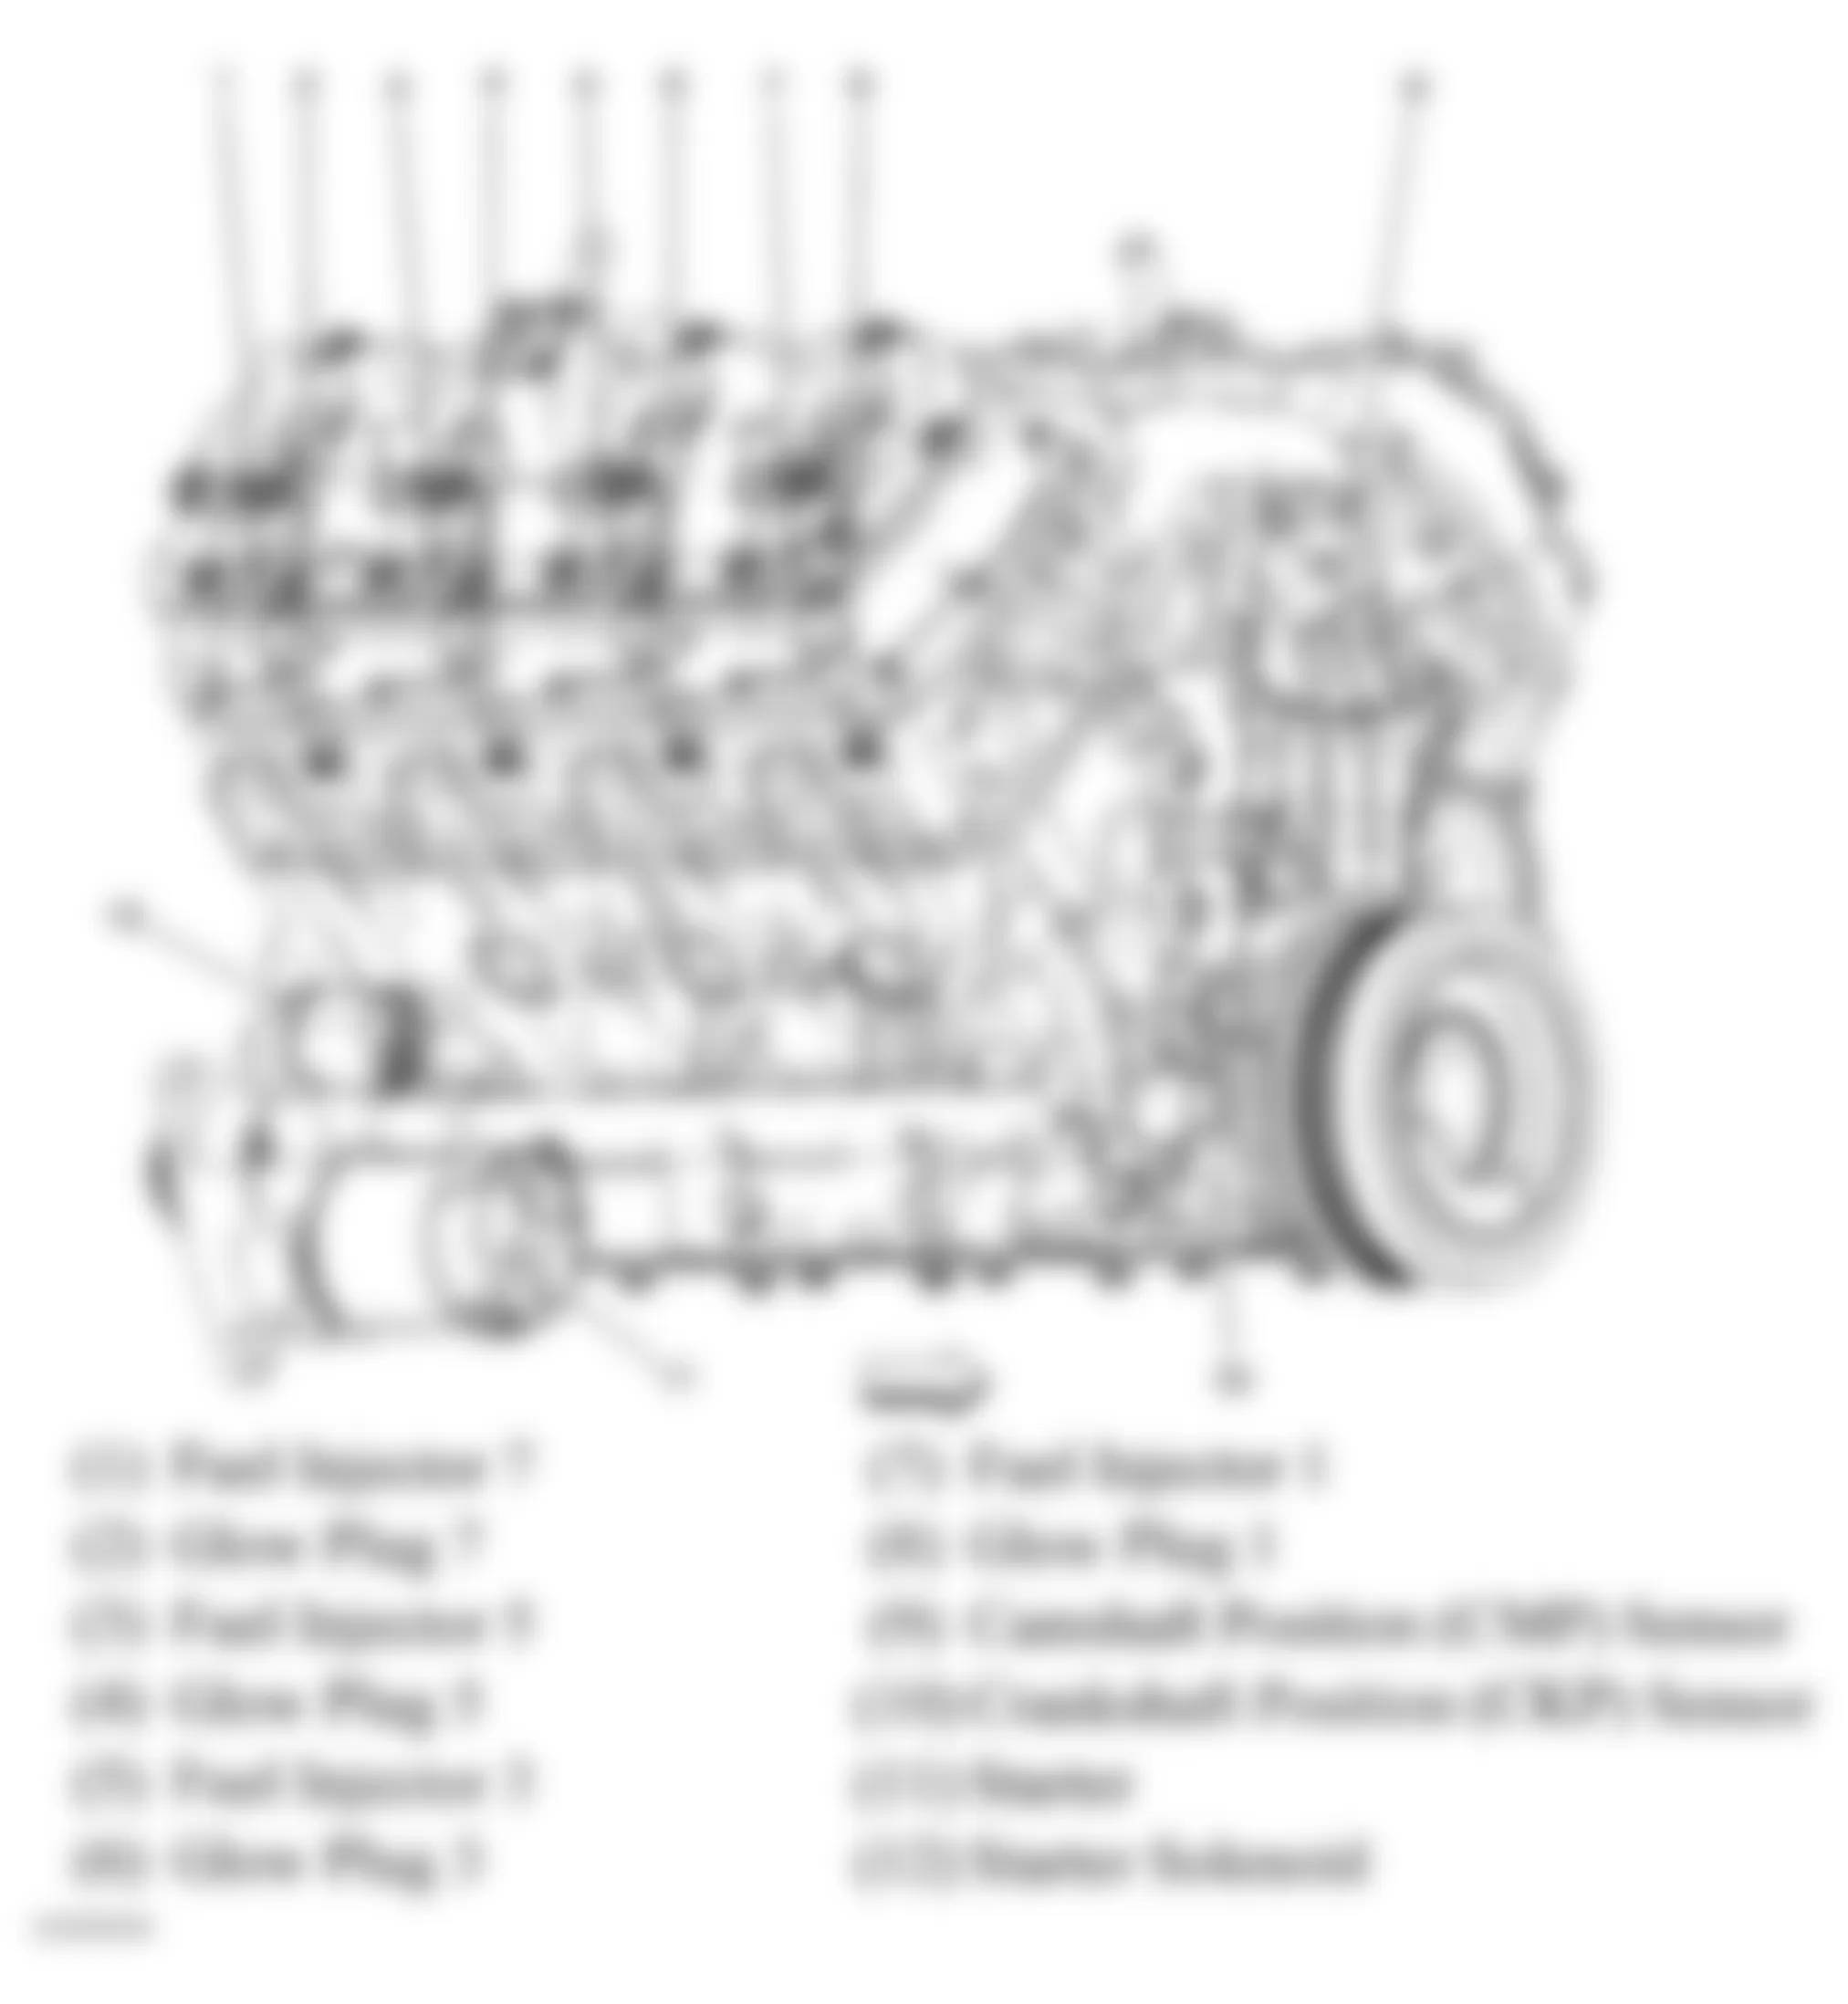 GMC Savana G3500 2009 - Component Locations -  Right Side Of Engine (6.6L)